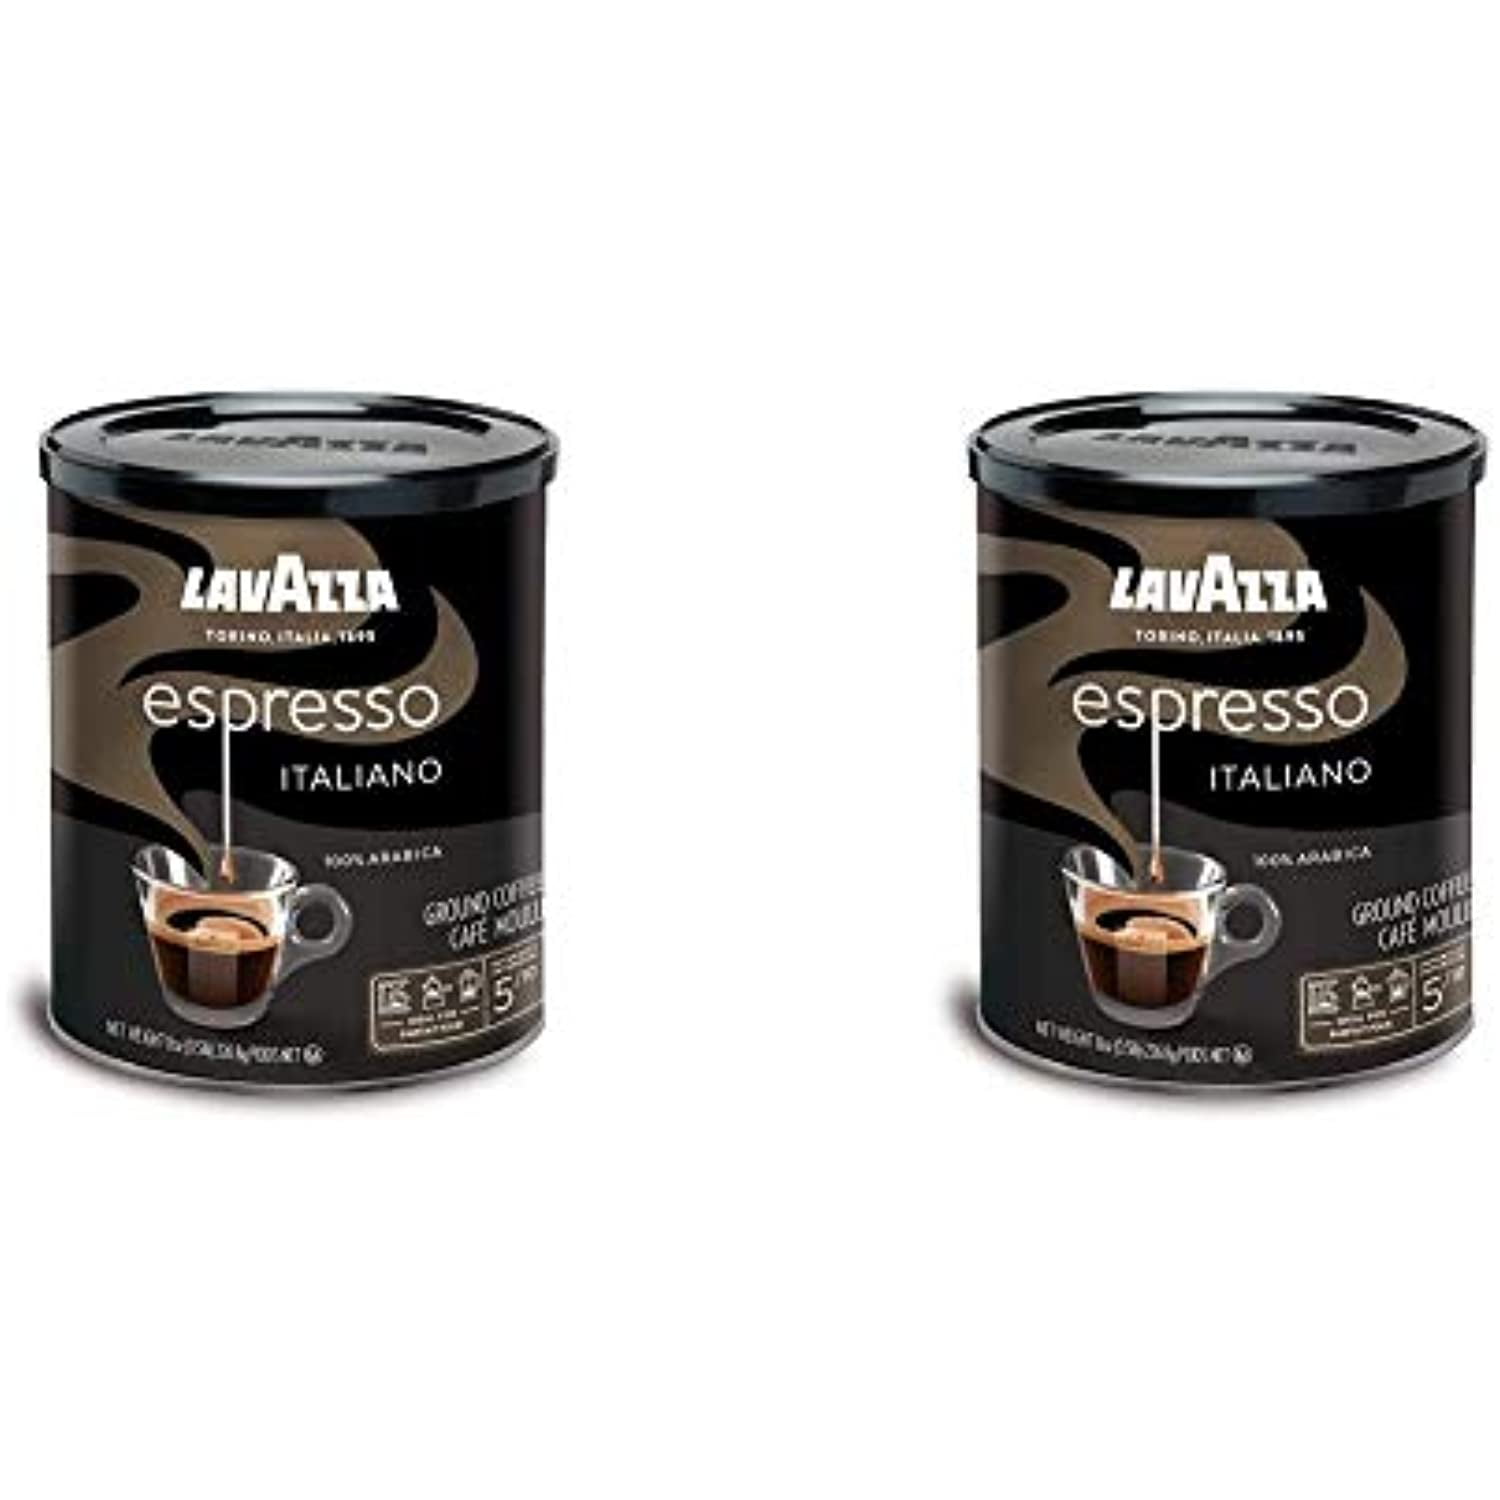 Lavazza Espresso Italiano Ground Coffee Blend, Medium Roast, 8-Ounce Cans  (Pack Of 6) & Espresso Italiano Ground Coffee Blend, Medium Roast, 8-Ounce  Cans,Pack Of 4 (Packaging May Vary) 